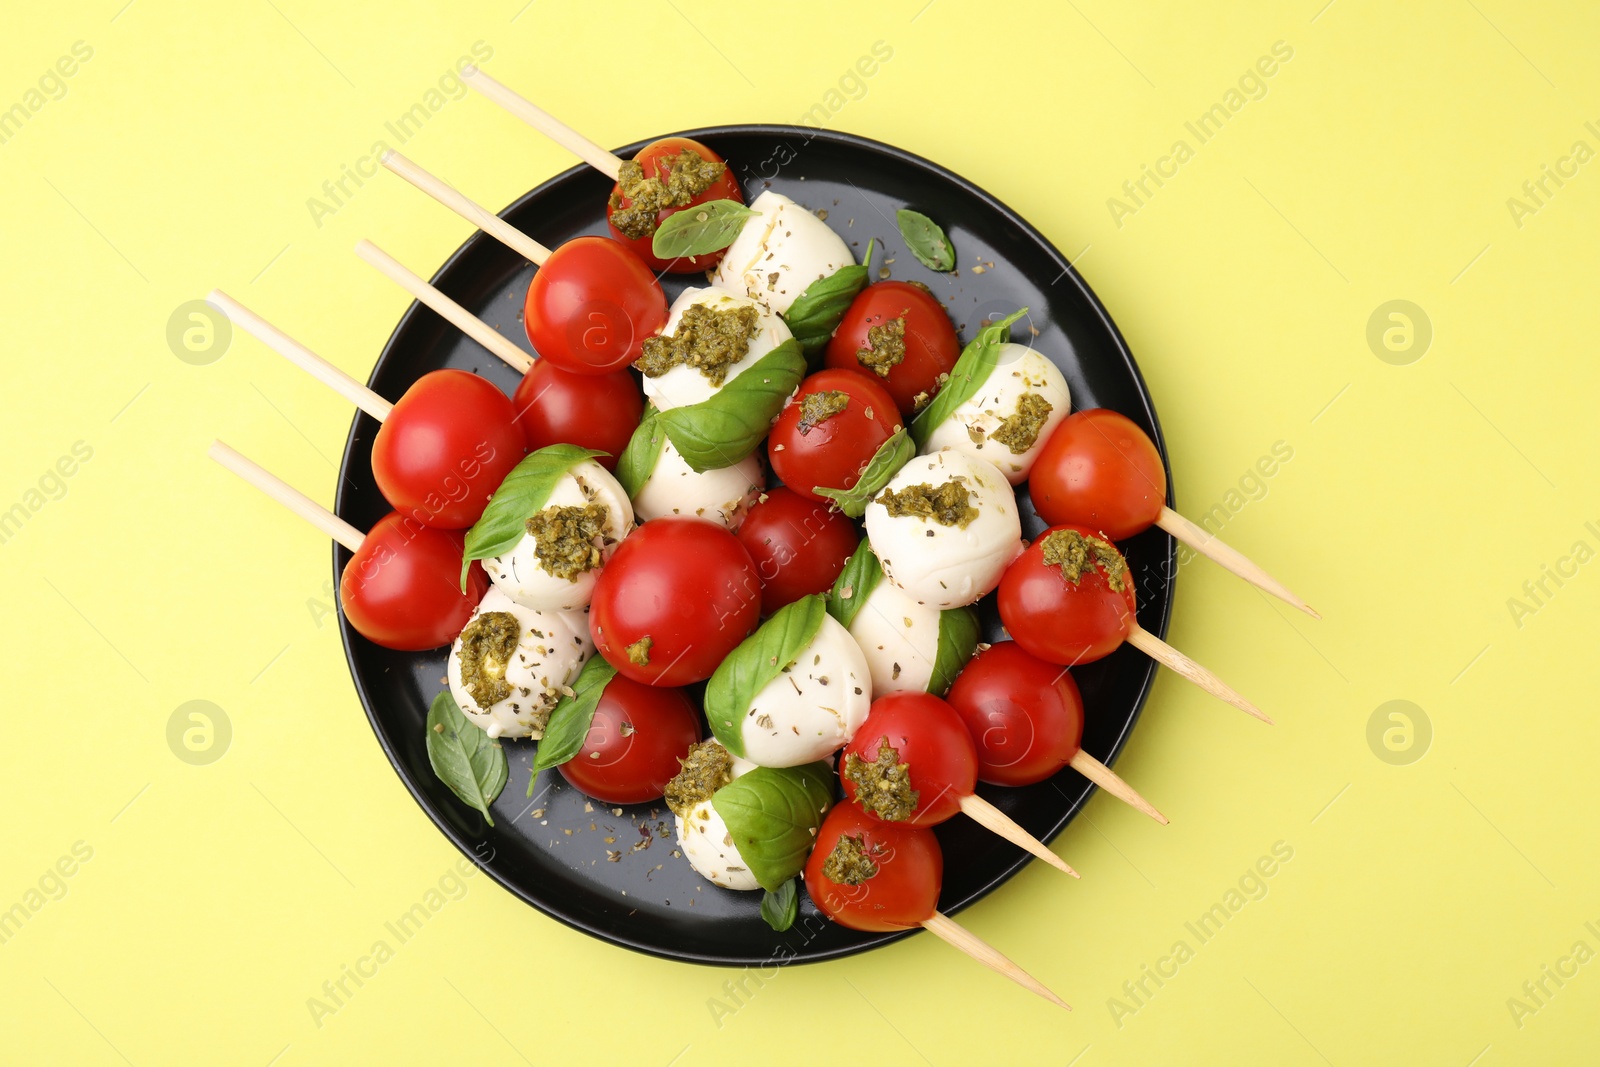 Photo of Caprese skewers with tomatoes, mozzarella balls, basil and pesto sauce on yellow background, top view